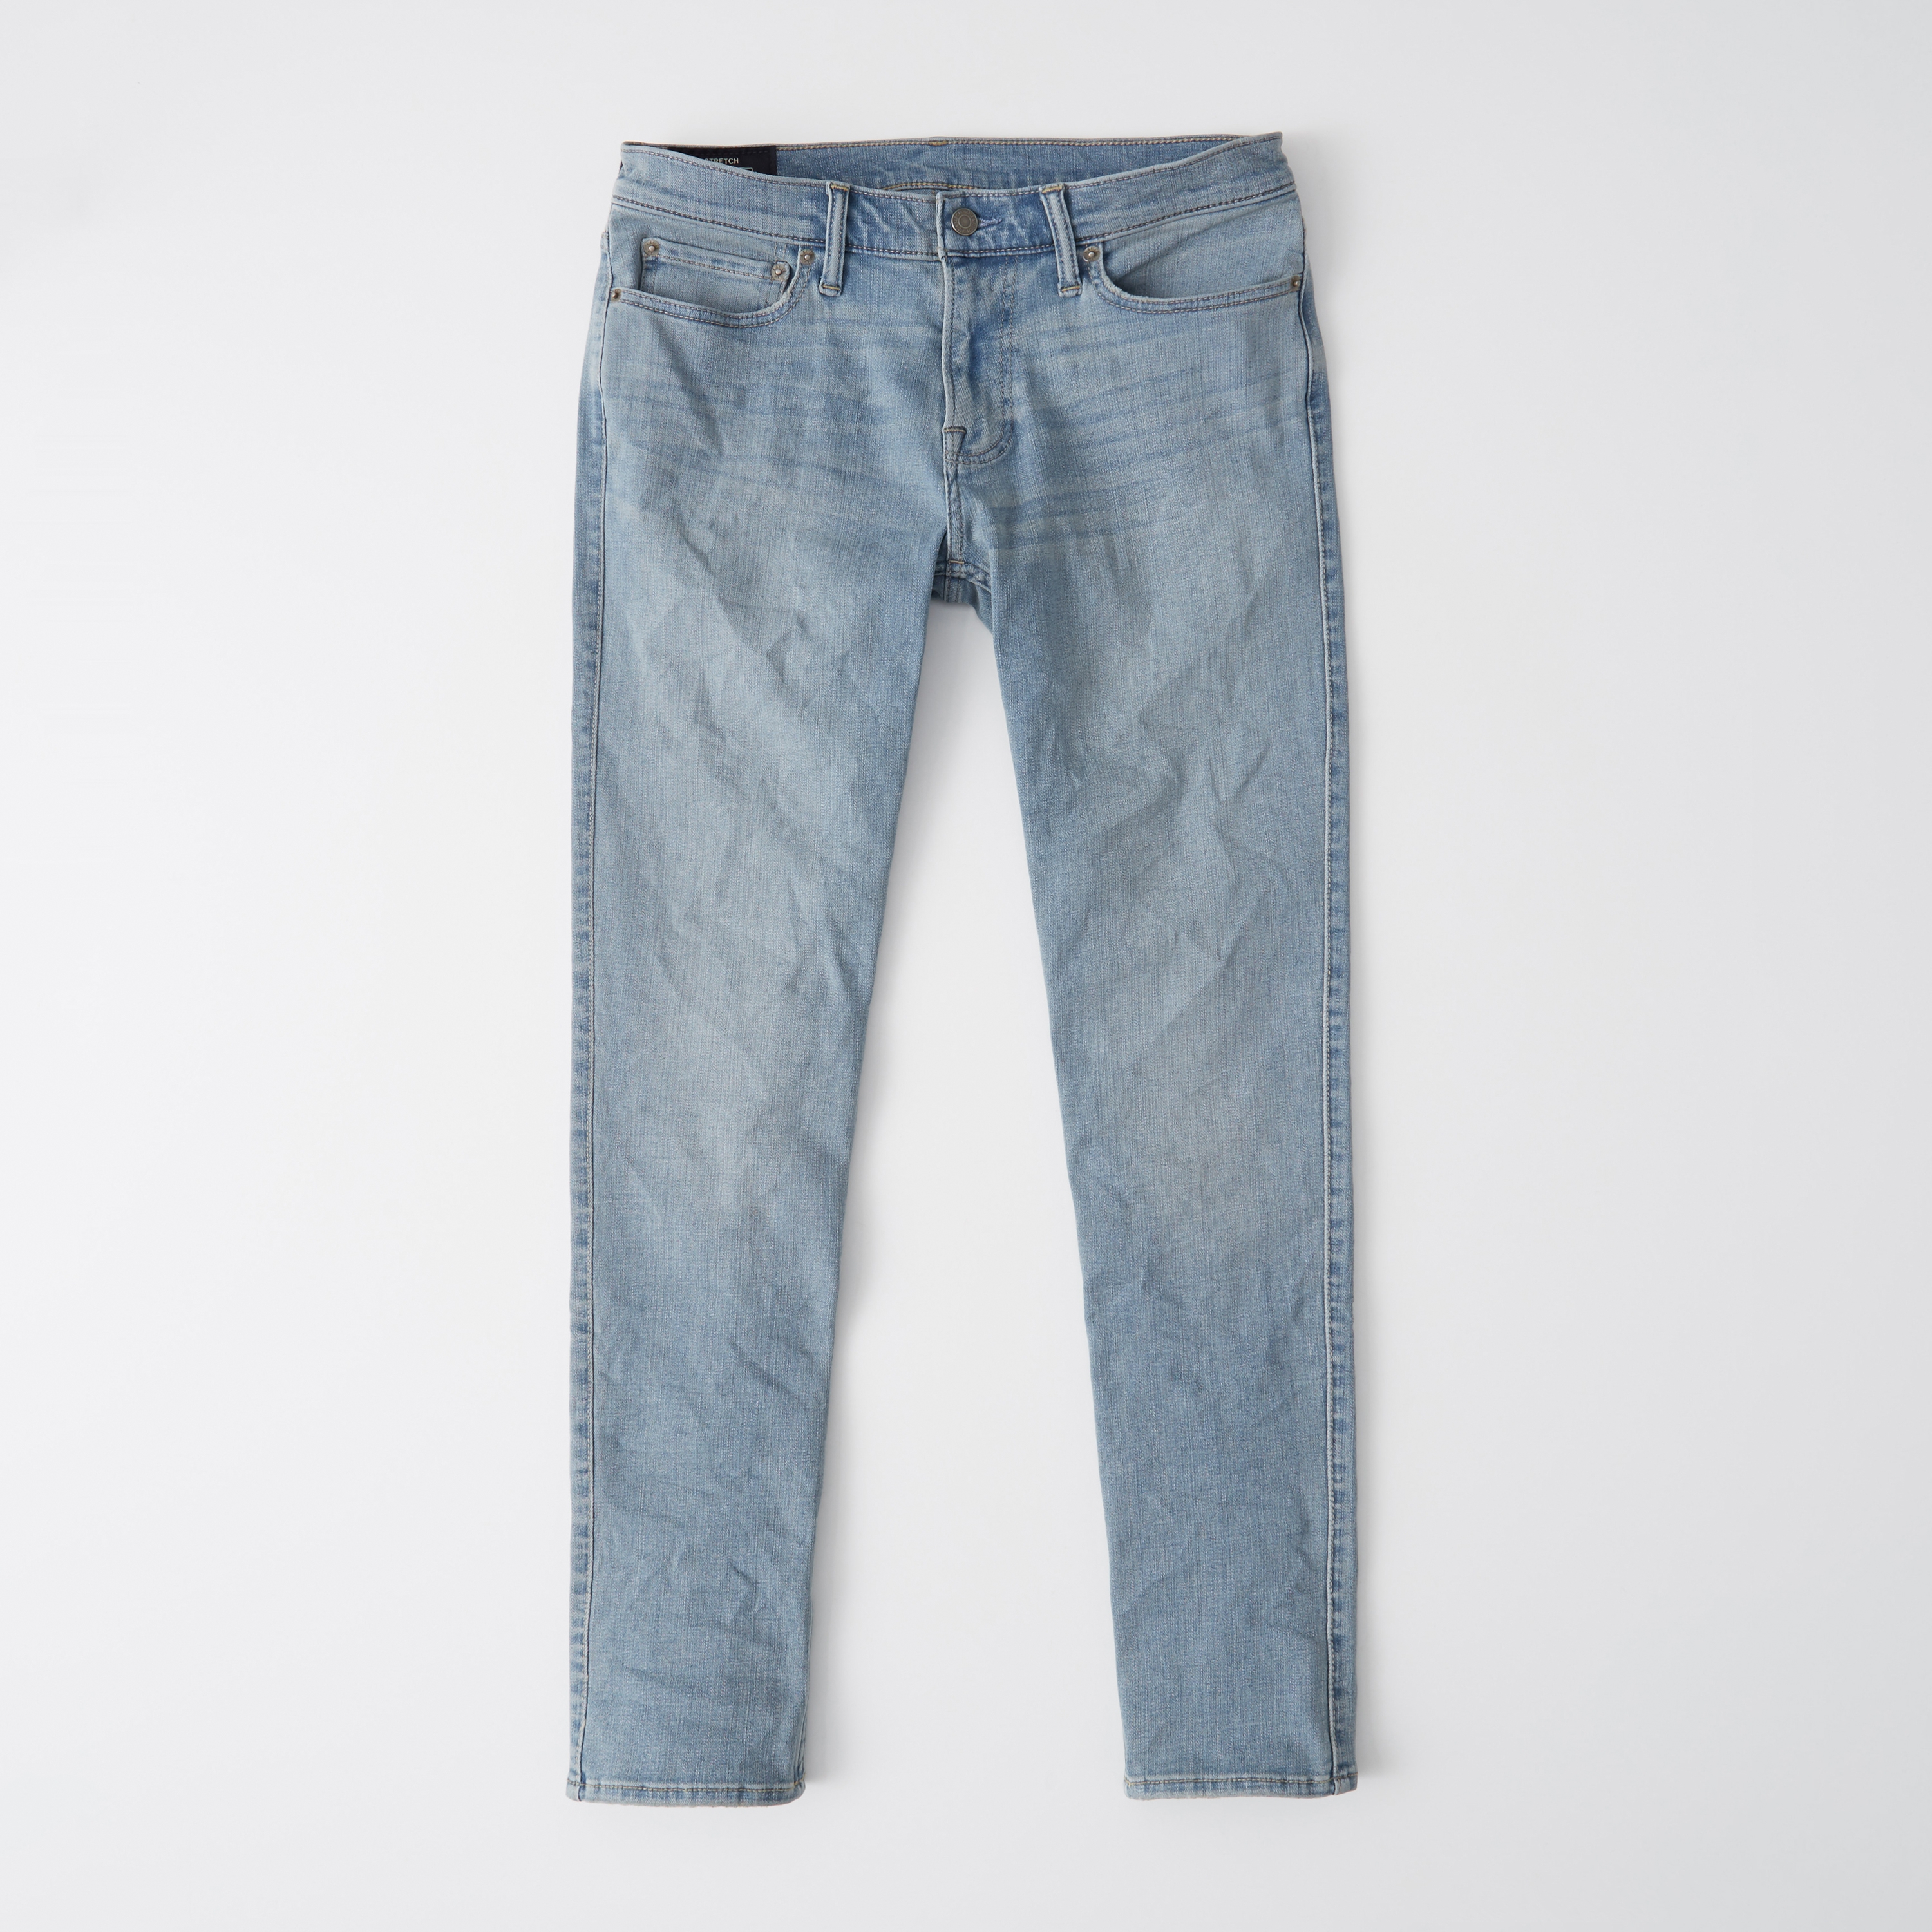 abercrombie athletic skinny review